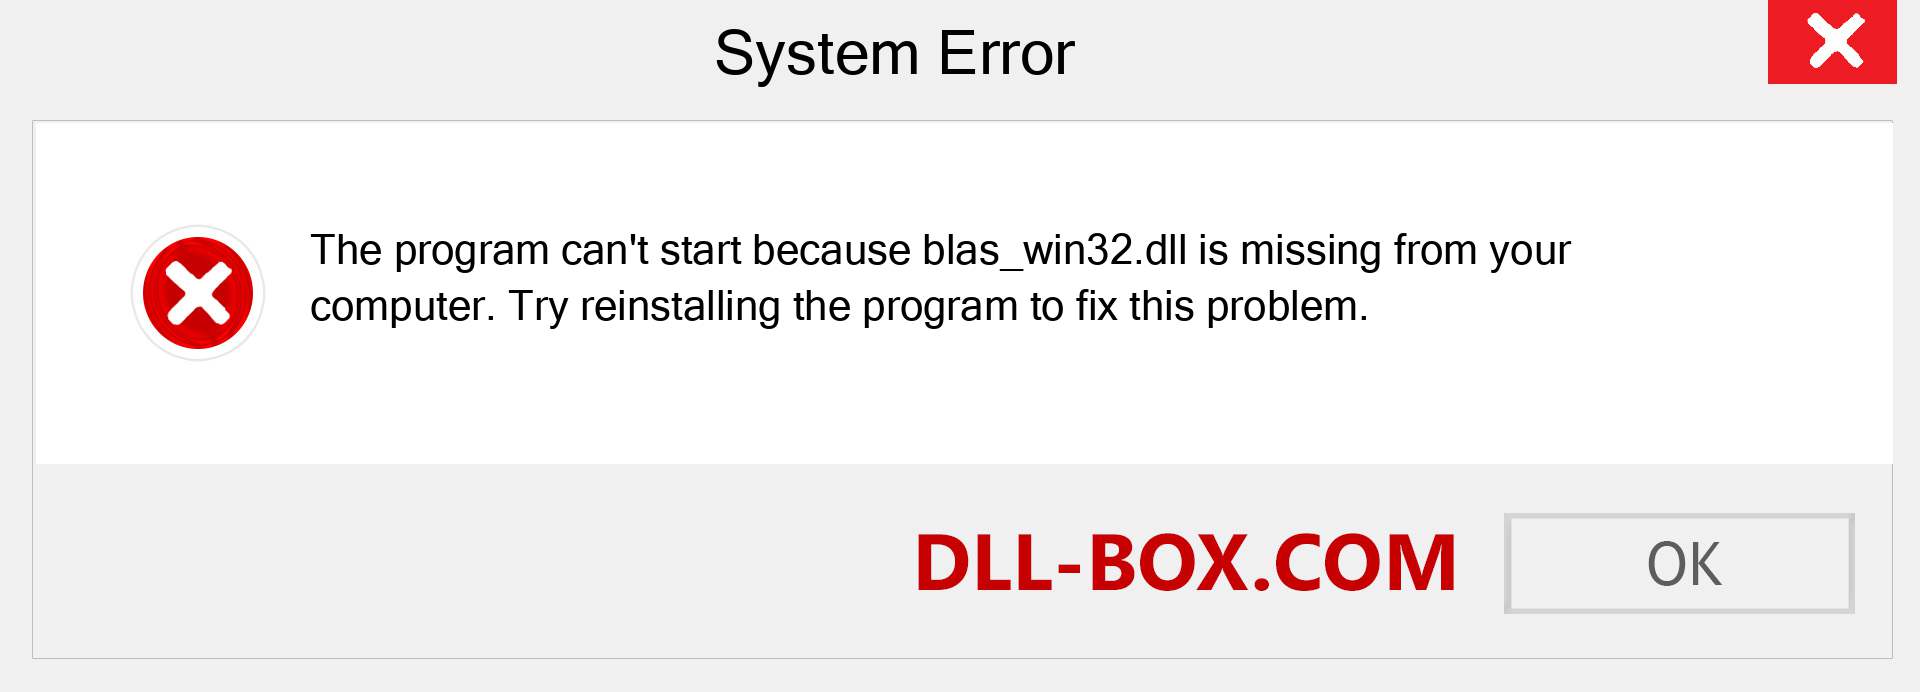  blas_win32.dll file is missing?. Download for Windows 7, 8, 10 - Fix  blas_win32 dll Missing Error on Windows, photos, images